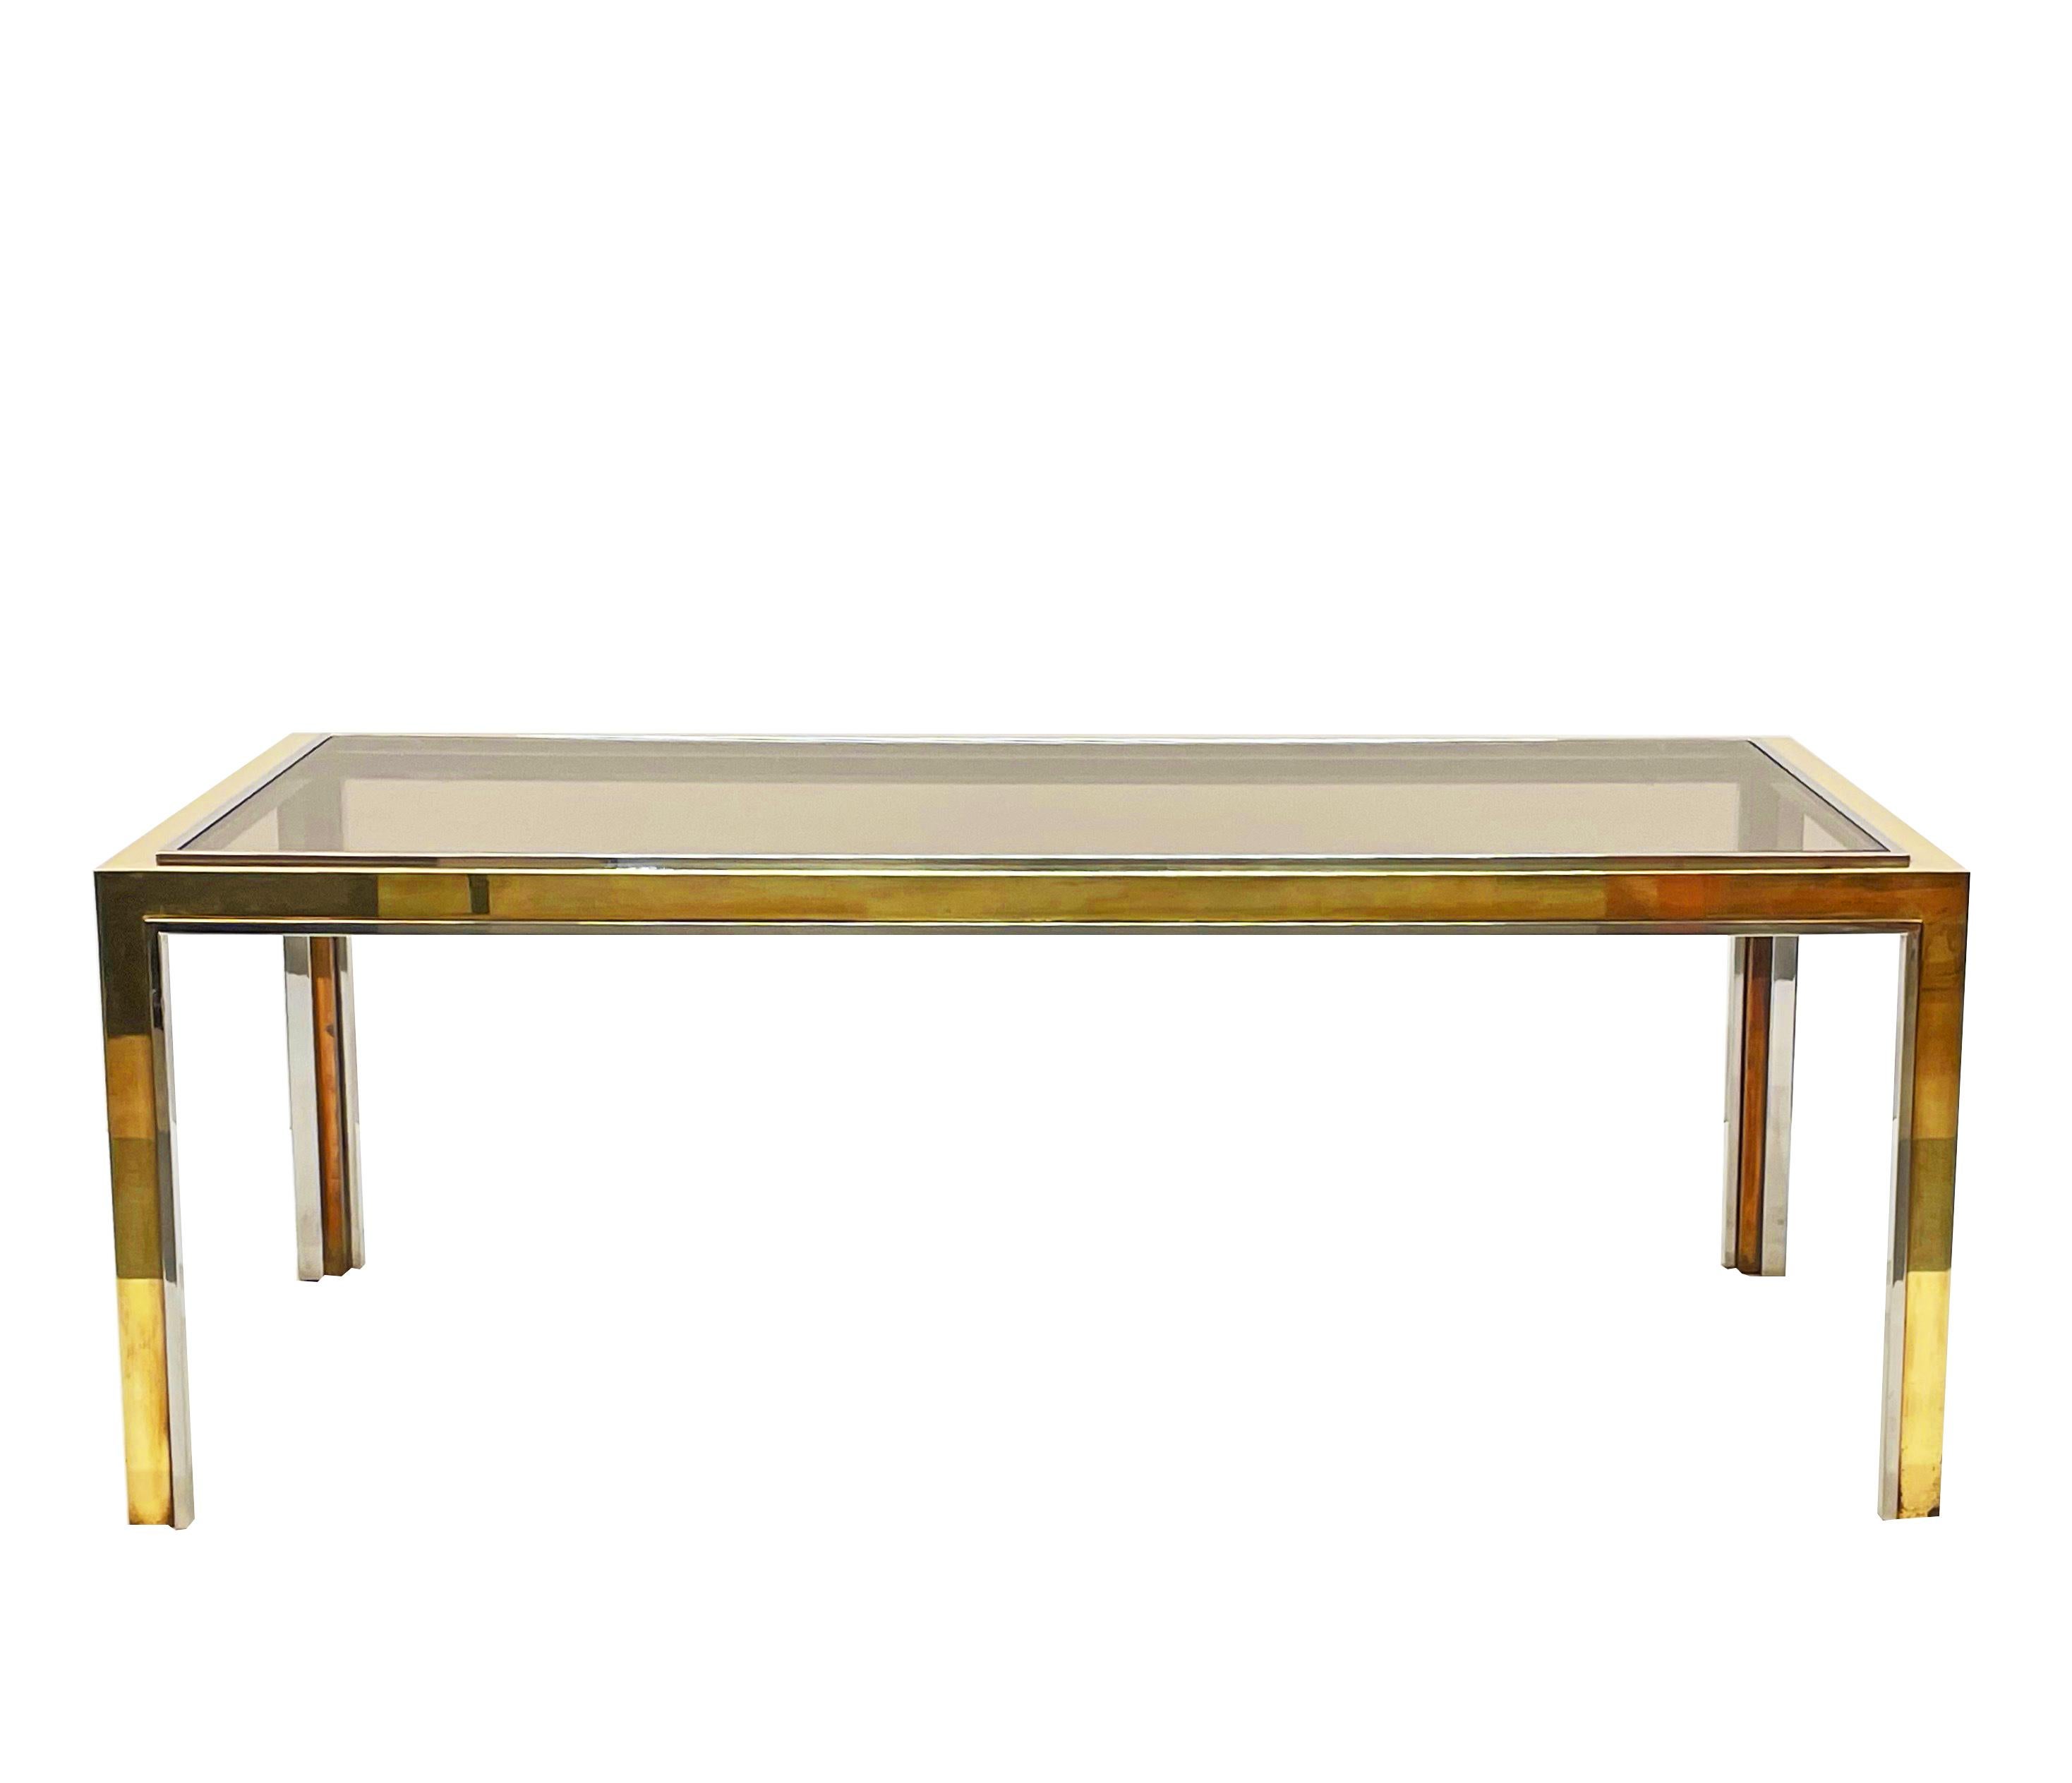 This midcentury iconic coffee table was designed in the style of Romeo Rega, one of the best 1970s-era Italian designers, well-known for the combination of modernism and glamour in his furniture creations.

Like most of Rega's production, this